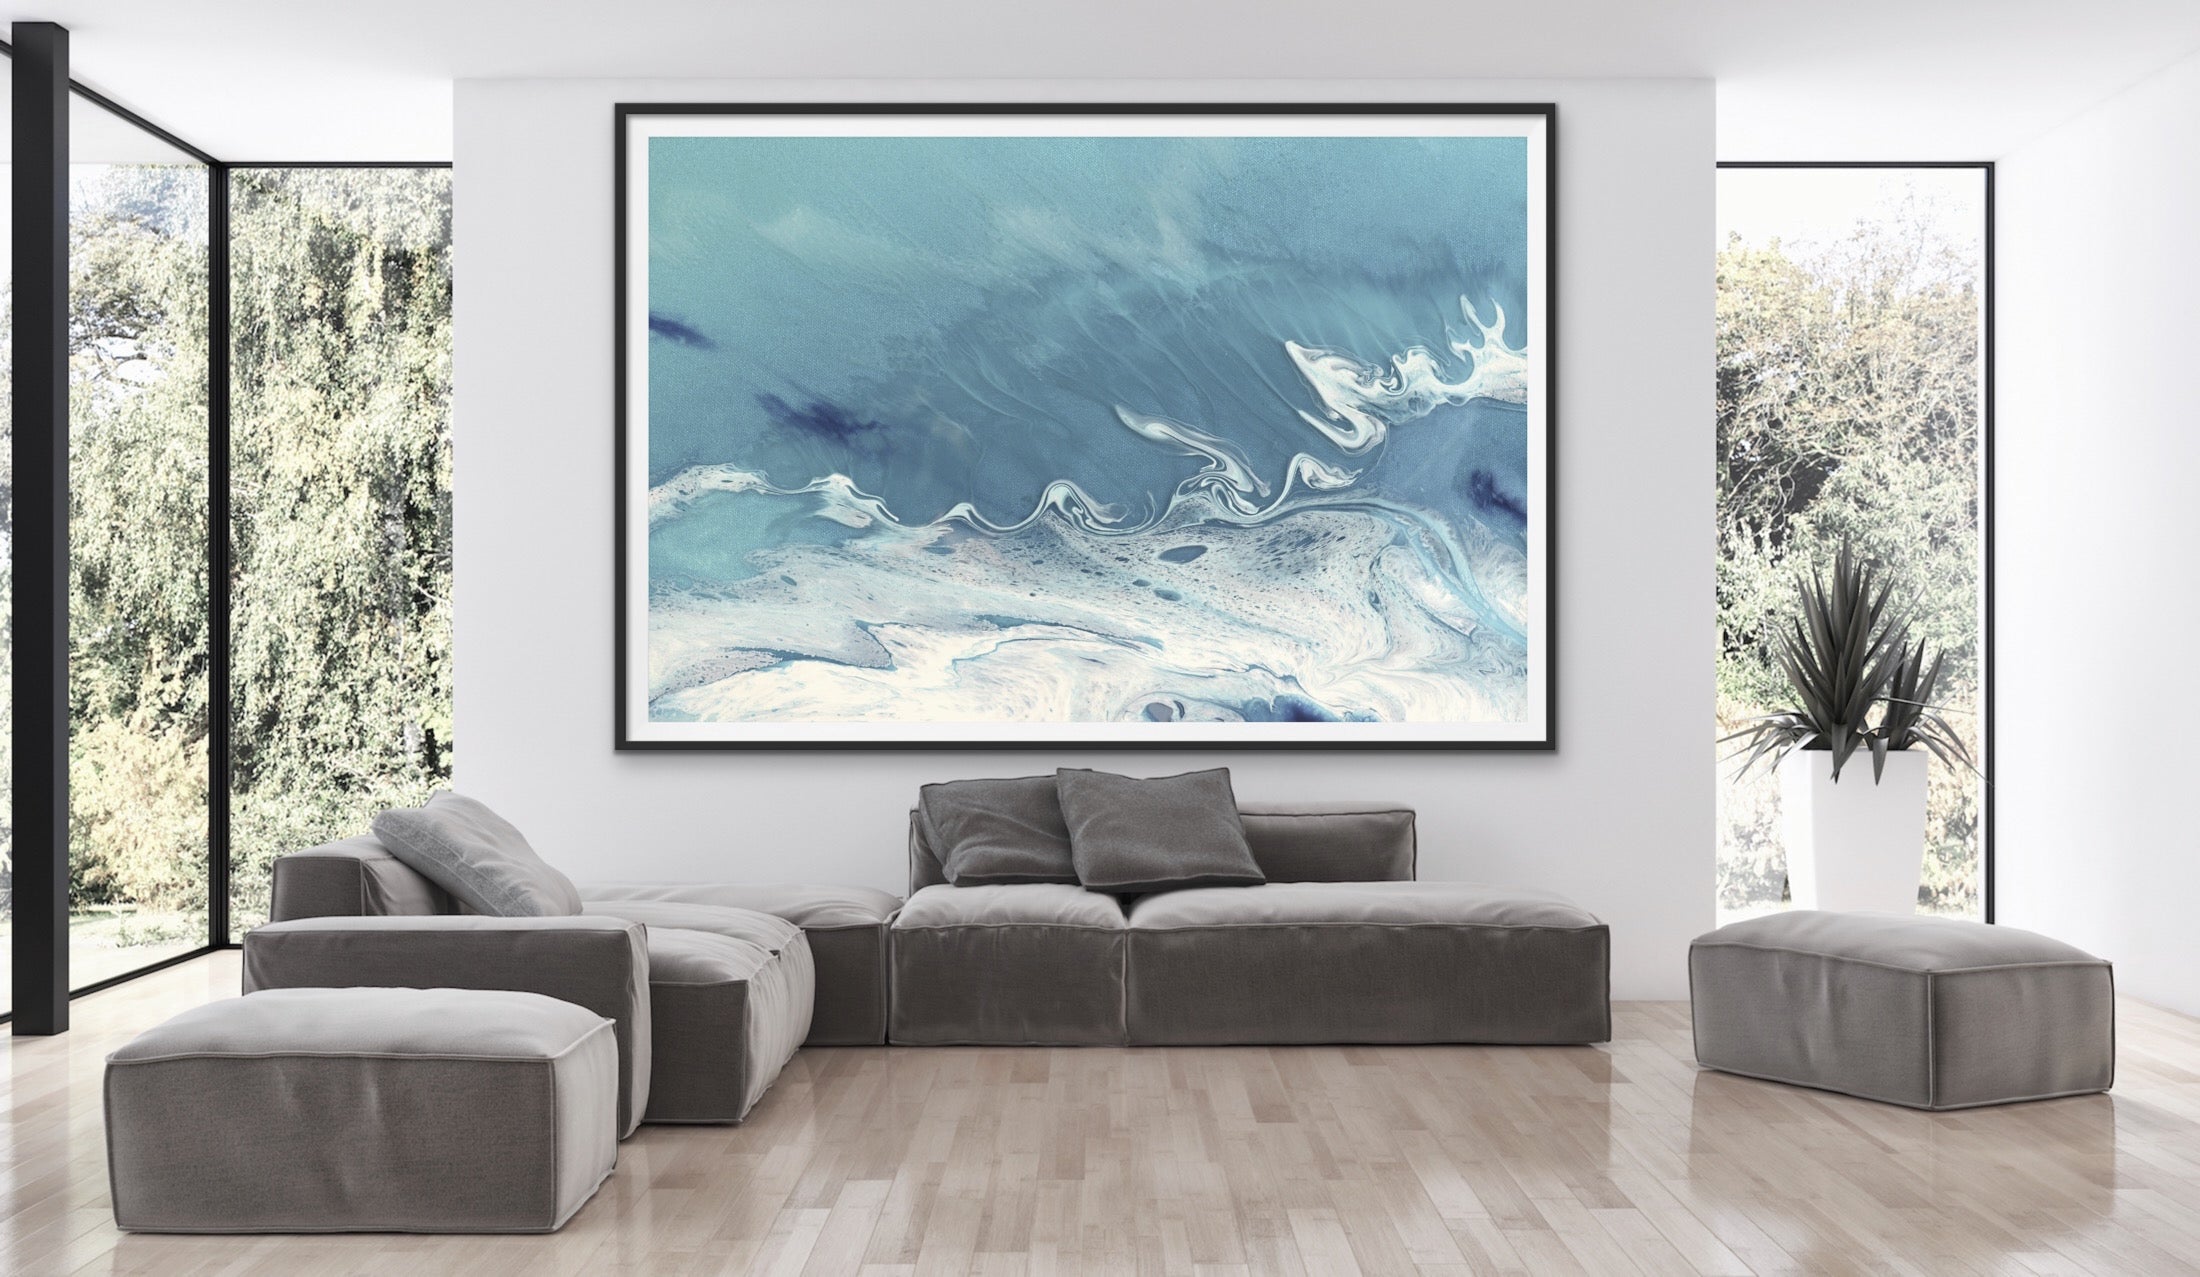 Pastel Abstract Artwork. Bali Utopia Grey Sky. Art Print. Antuanelle 5 Neutral Limited Edition Print